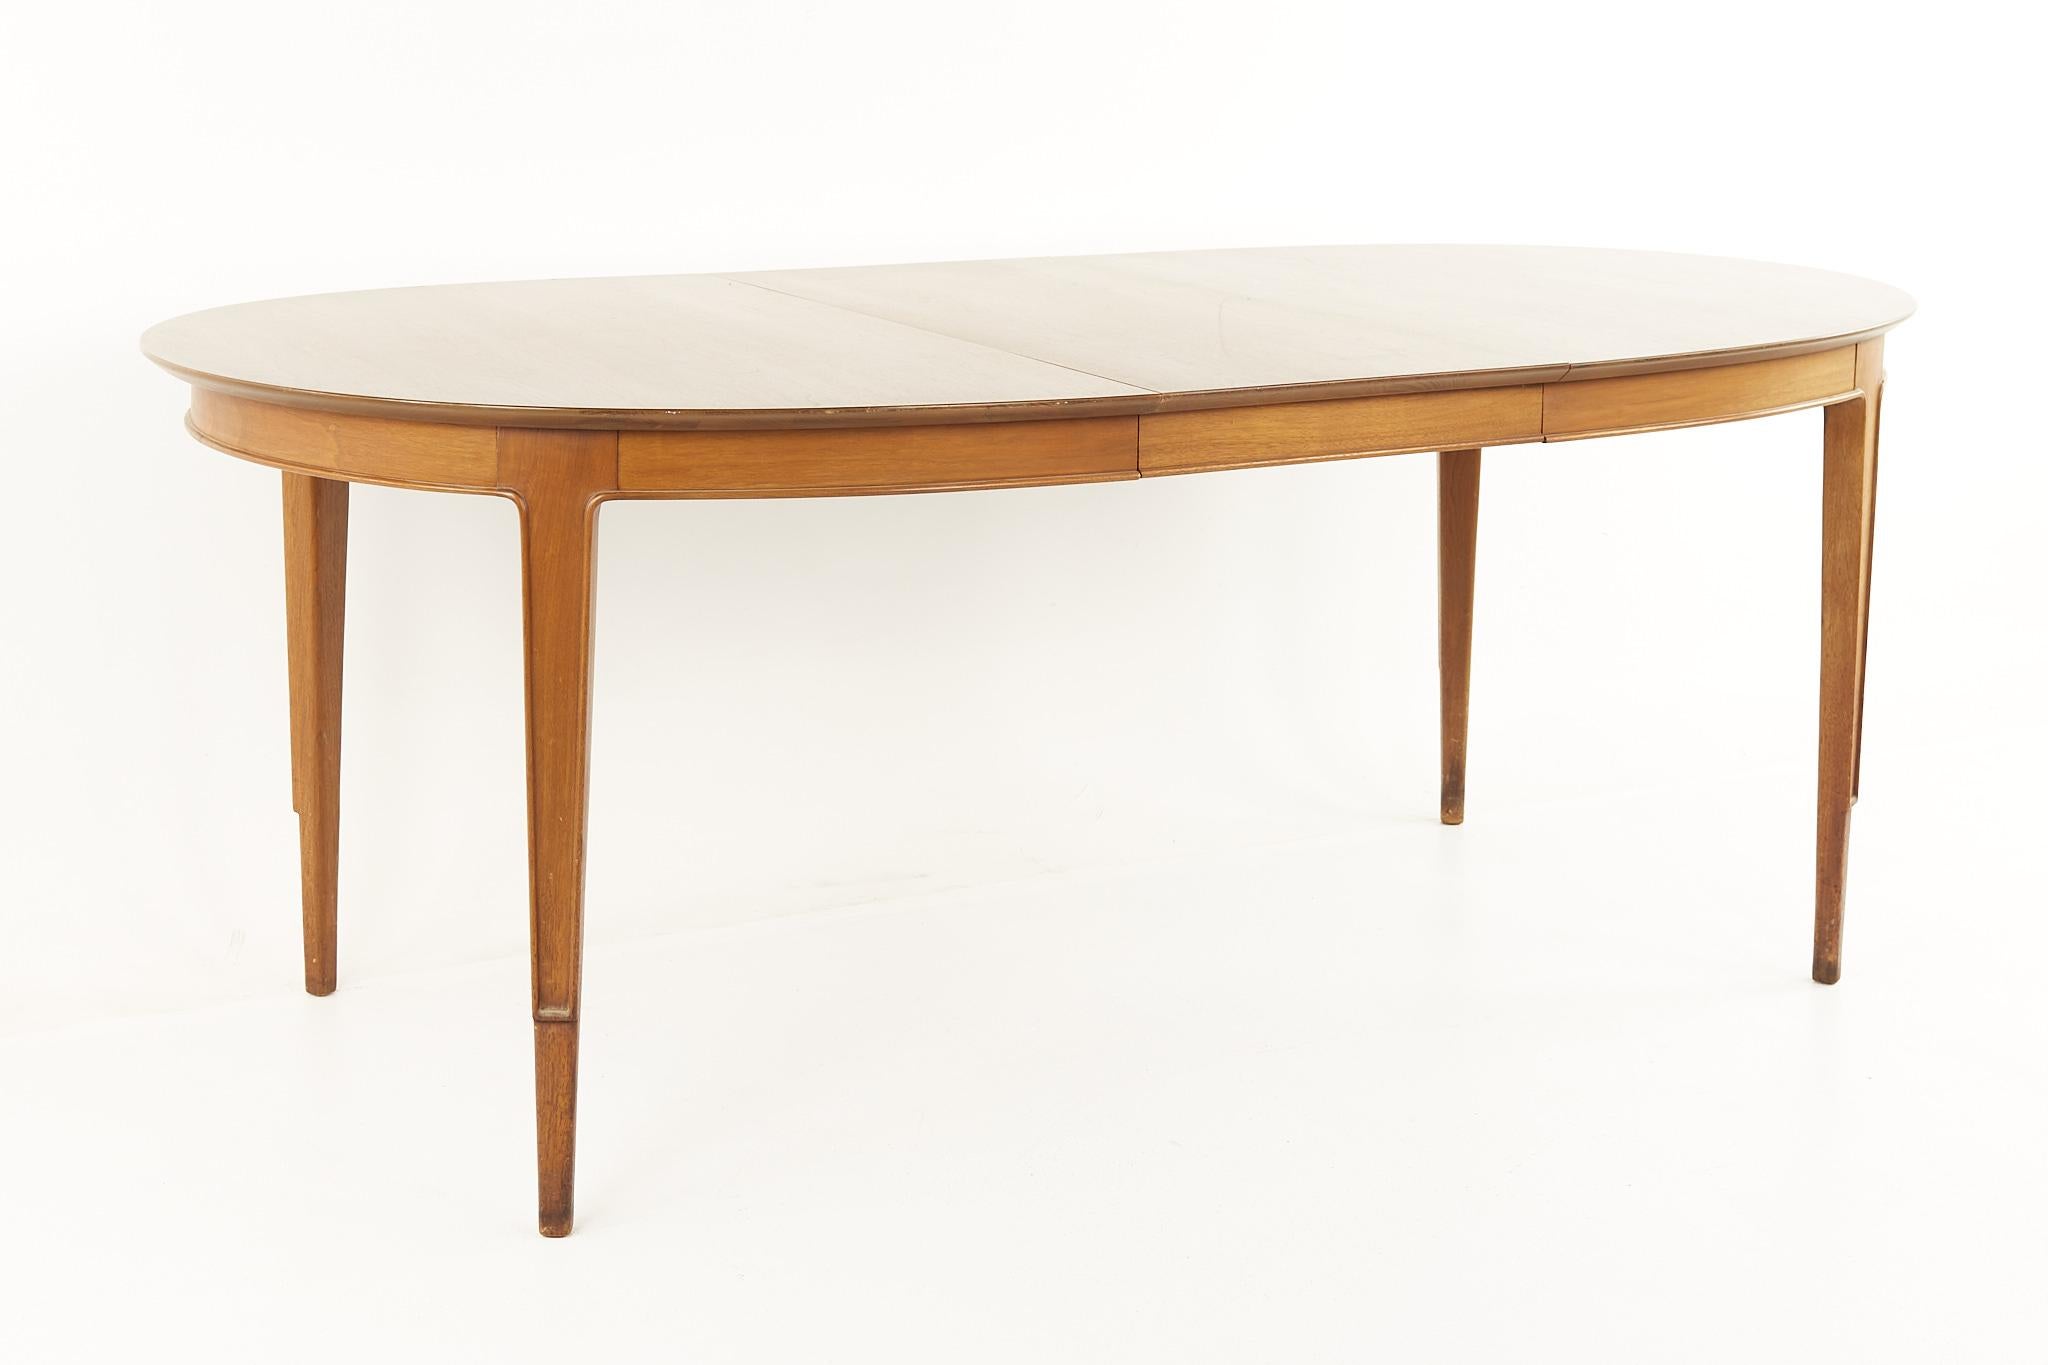 Late 20th Century Mount Airy Janus Mid Century Dining Table with 2 Leaves